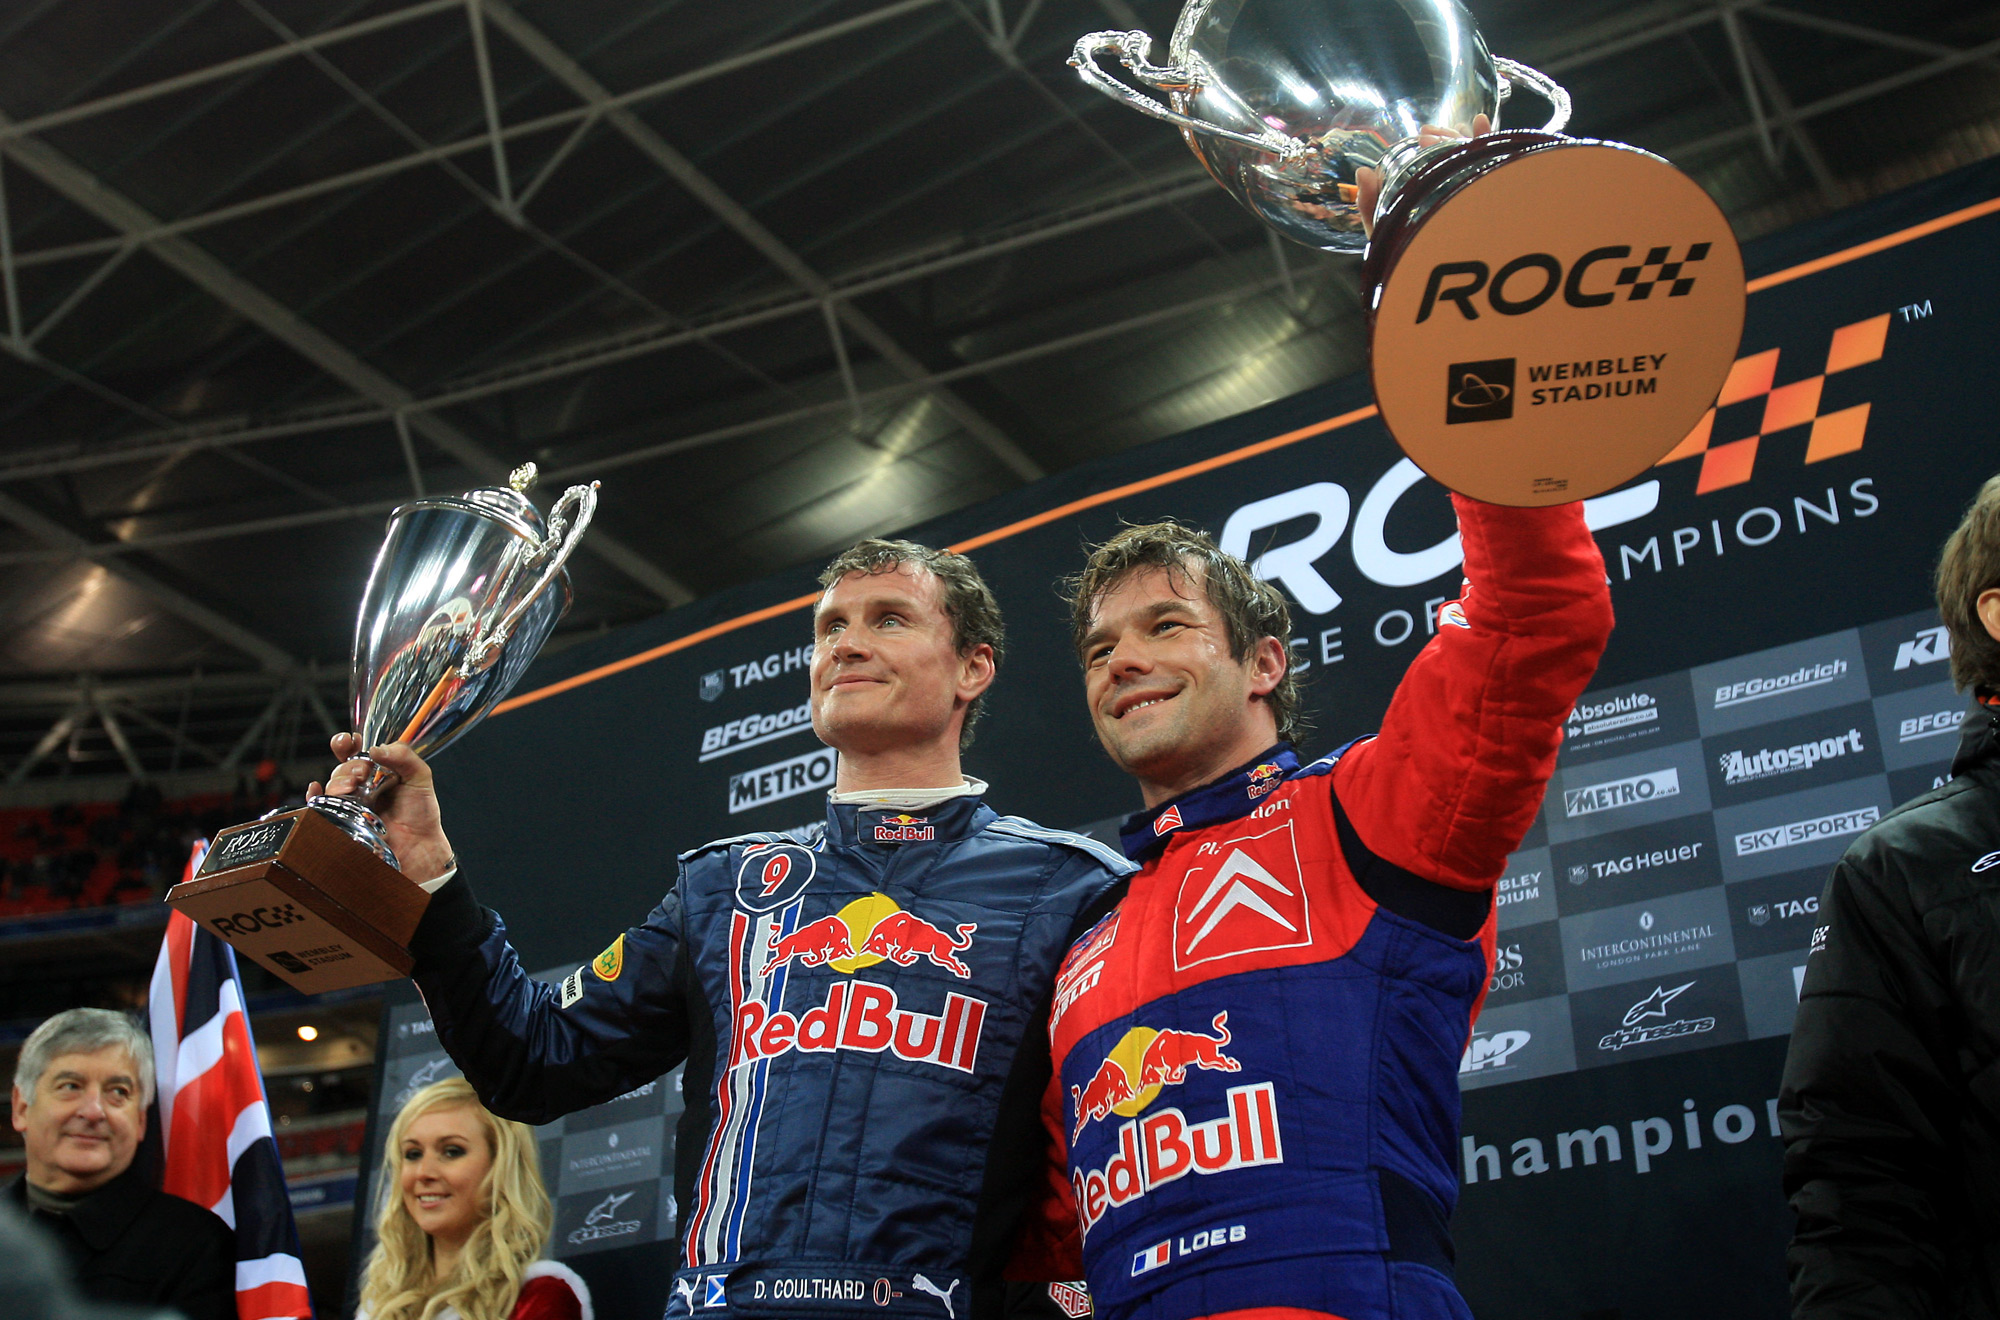 The 2008 Race of Champions has been run and won.